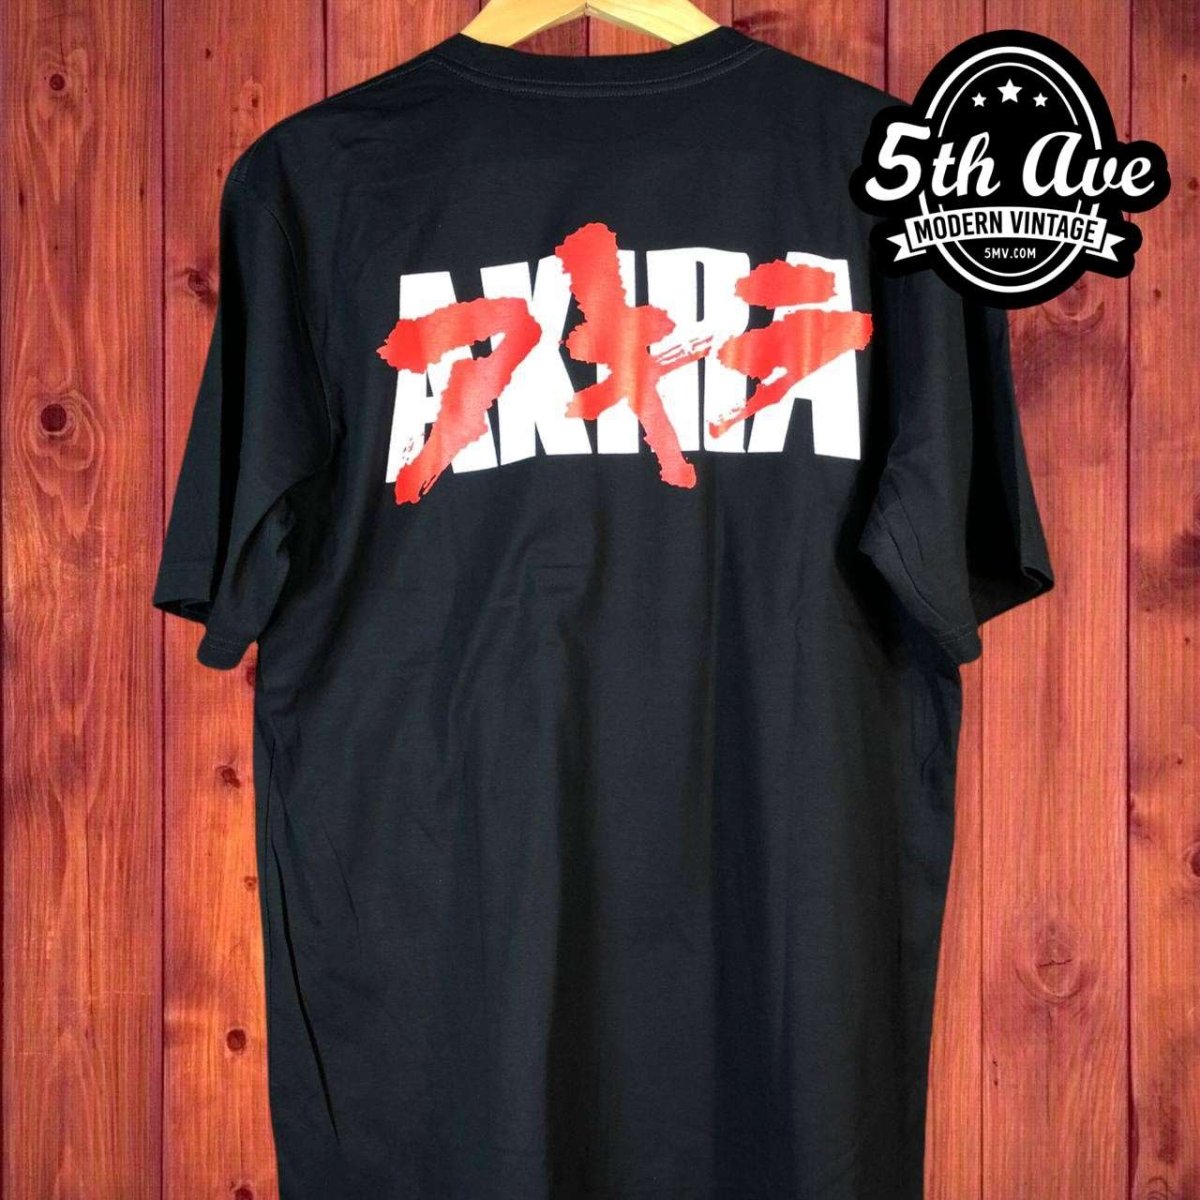 Akira: Iconic Vision - Black t shirt with Striking Front Image and Bol